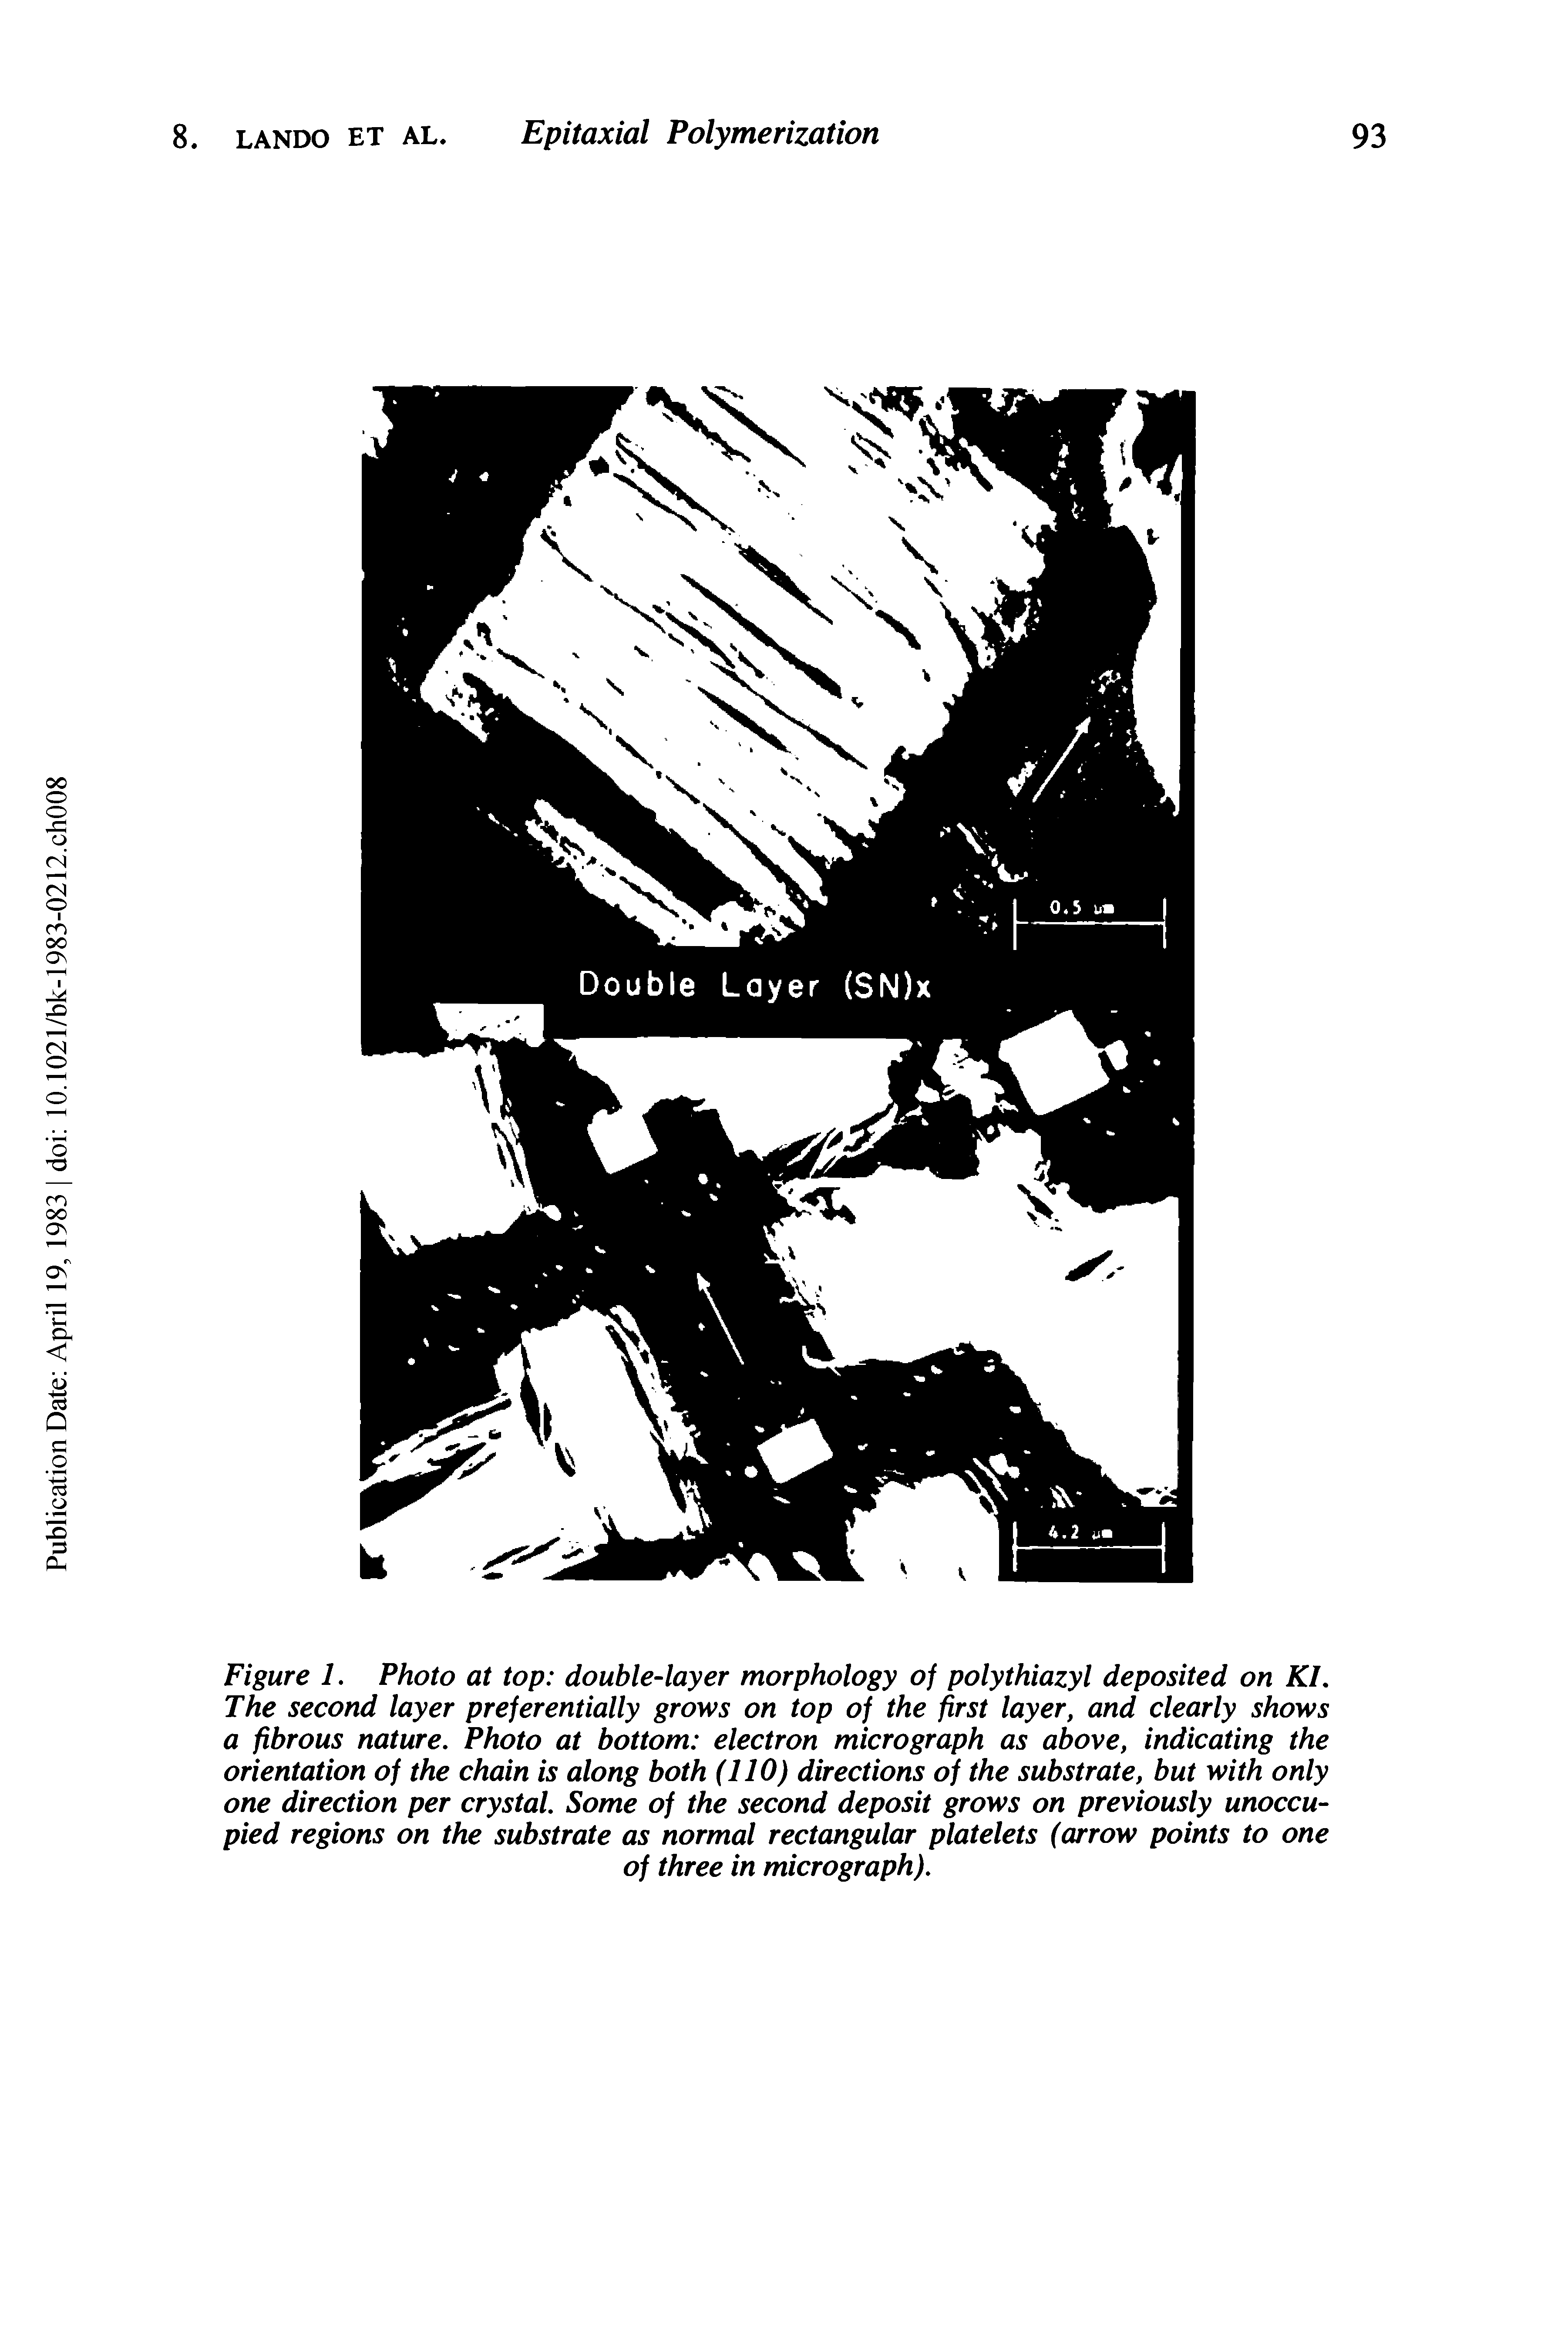 Figure 1. Photo at top double-layer morphology of polythiazyl deposited on KI. The second layer preferentially grows on top of the first layer, and clearly shows a fibrous nature. Photo at bottom electron micrograph as above, indicating the orientation of the chain is along both (110) directions of the substrate, but with only one direction per crystal. Some of the second deposit grows on previously unoccupied regions on the substrate as normal rectangular platelets (arrow points to one...